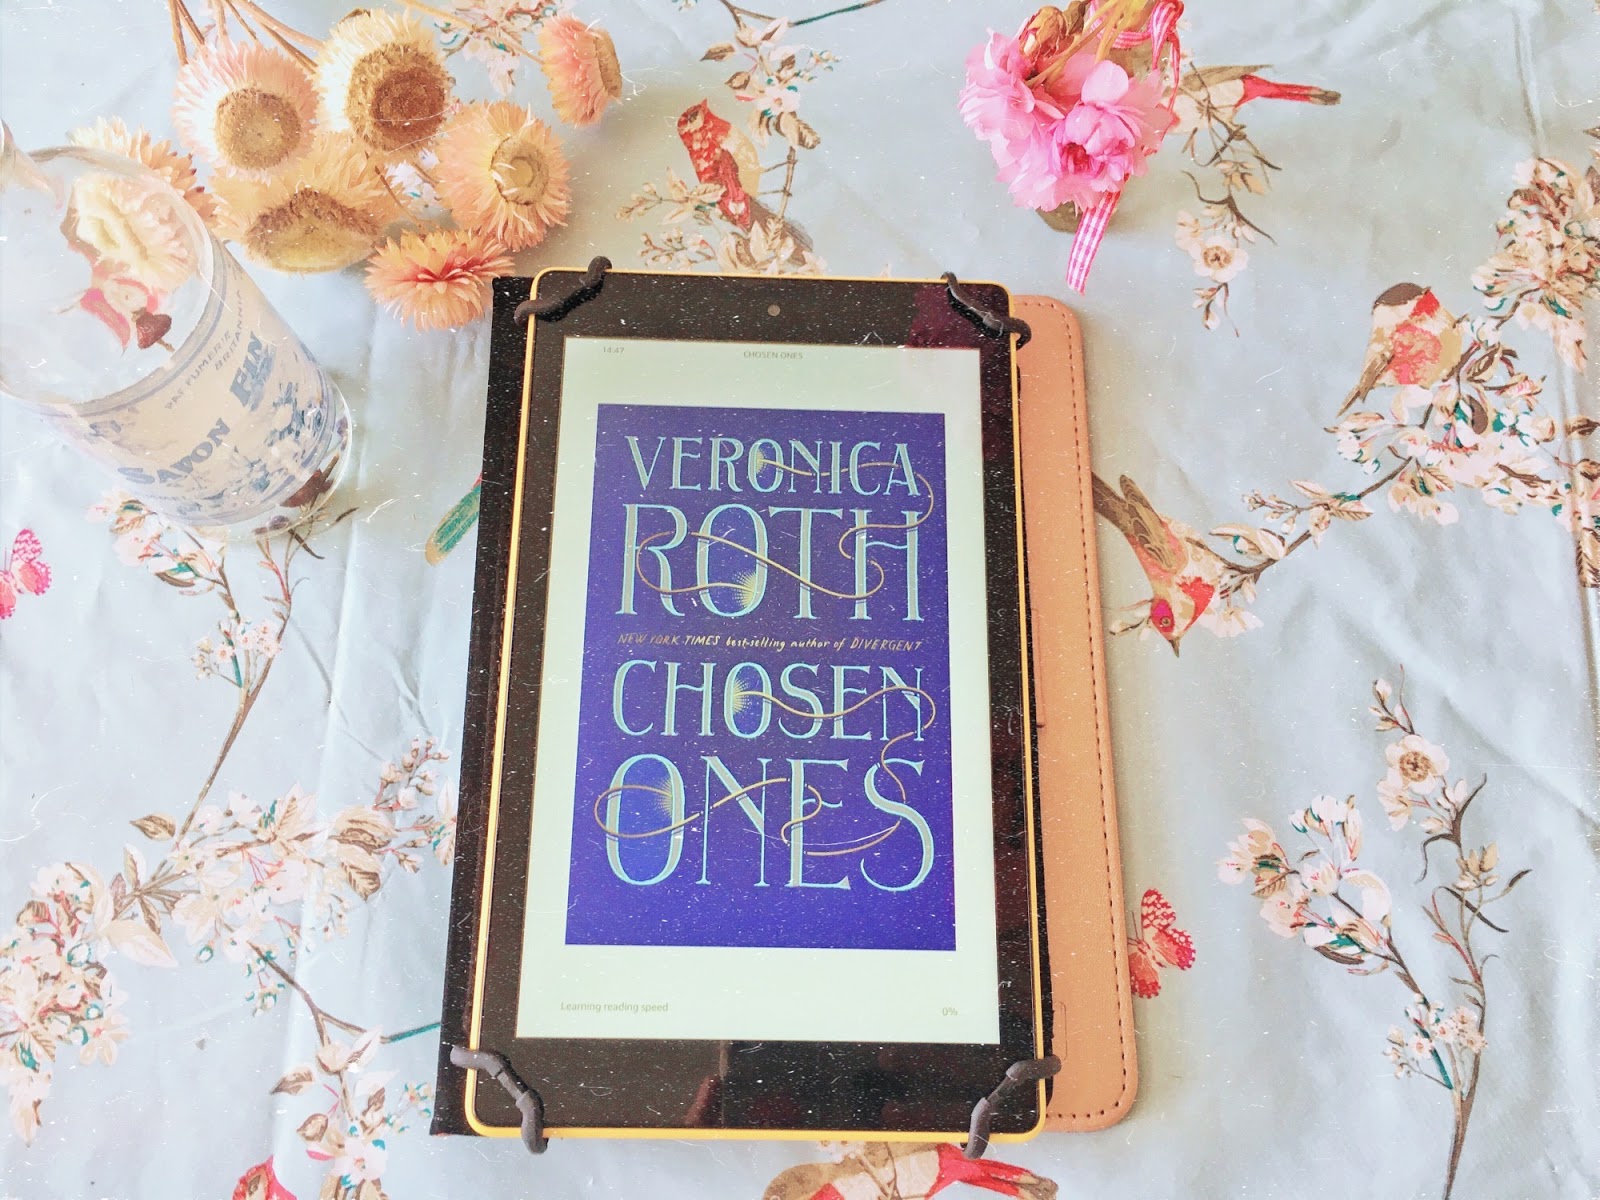 Chosen Ones by Veronica Roth  We are thrilled to announce CHOSEN